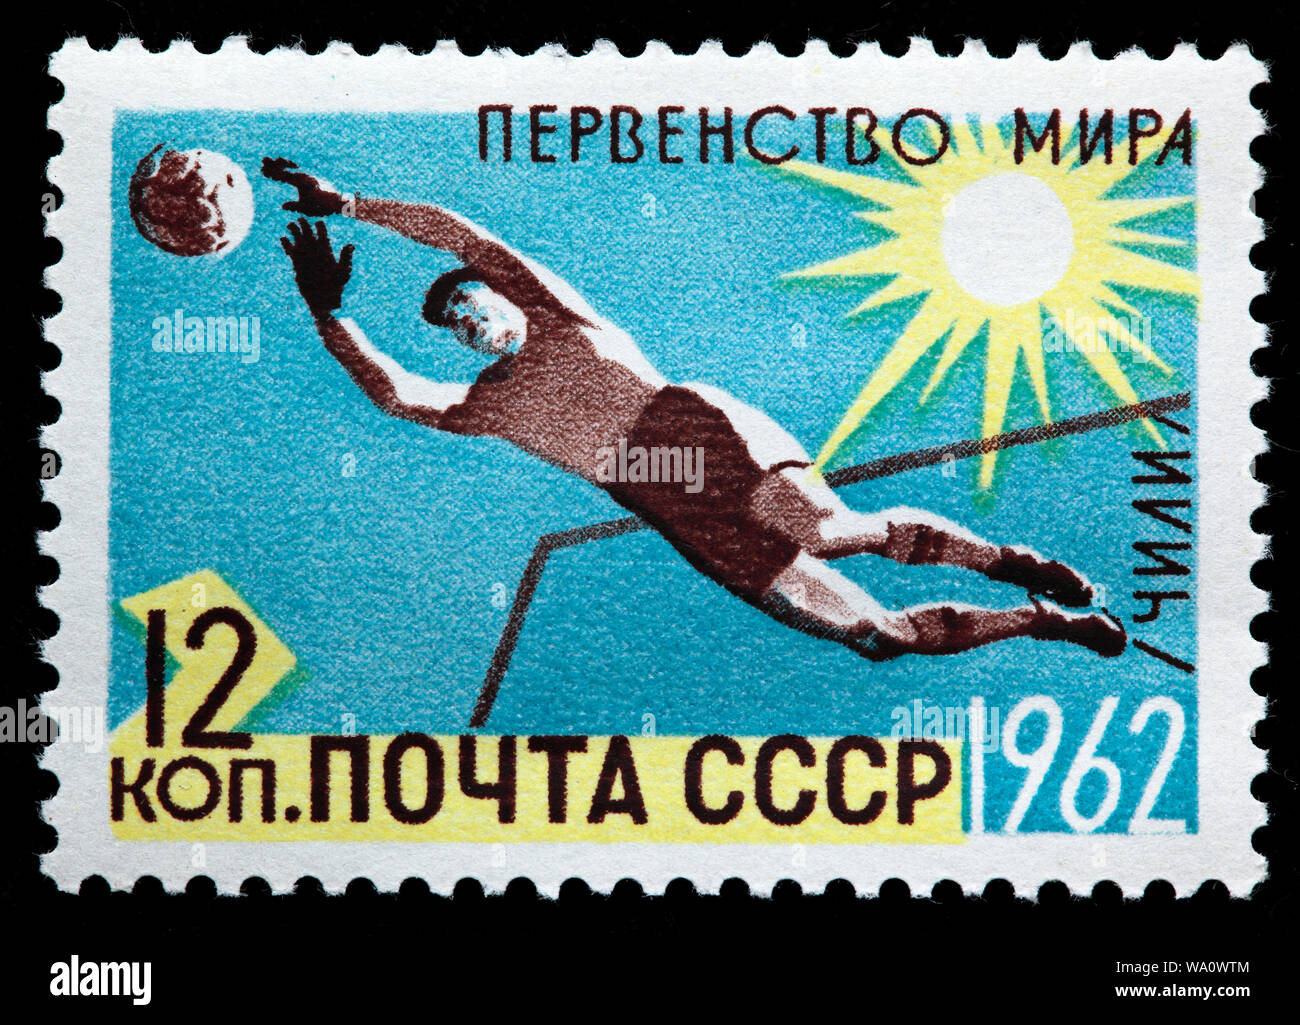 Goalkeeper, Football world championship, postage stamp, Russia, USSR, 1962 Stock Photo